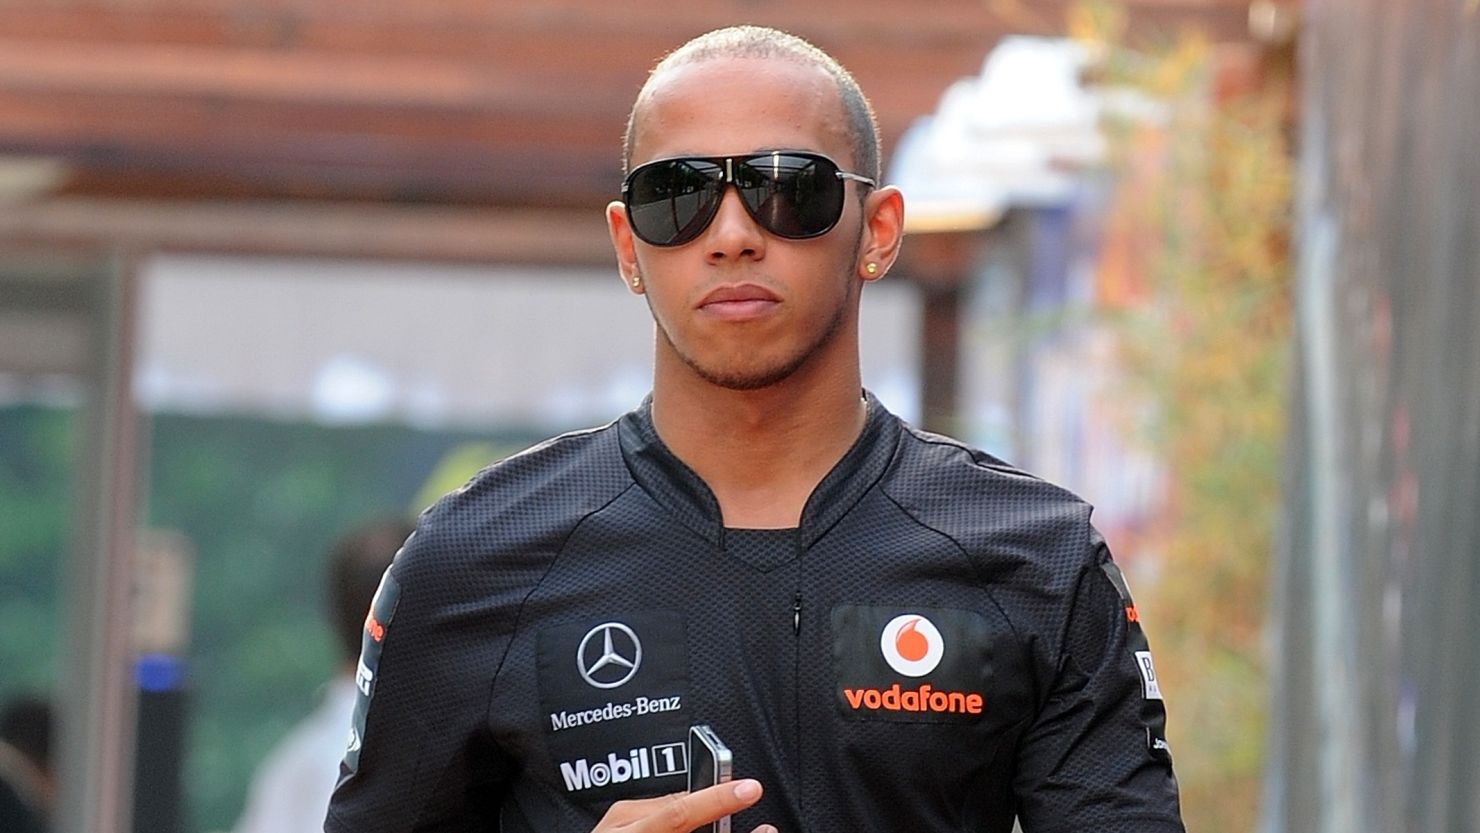 Lewis Hamilton has been in Formula One with McLaren since 2007 and won the world title in 2008.